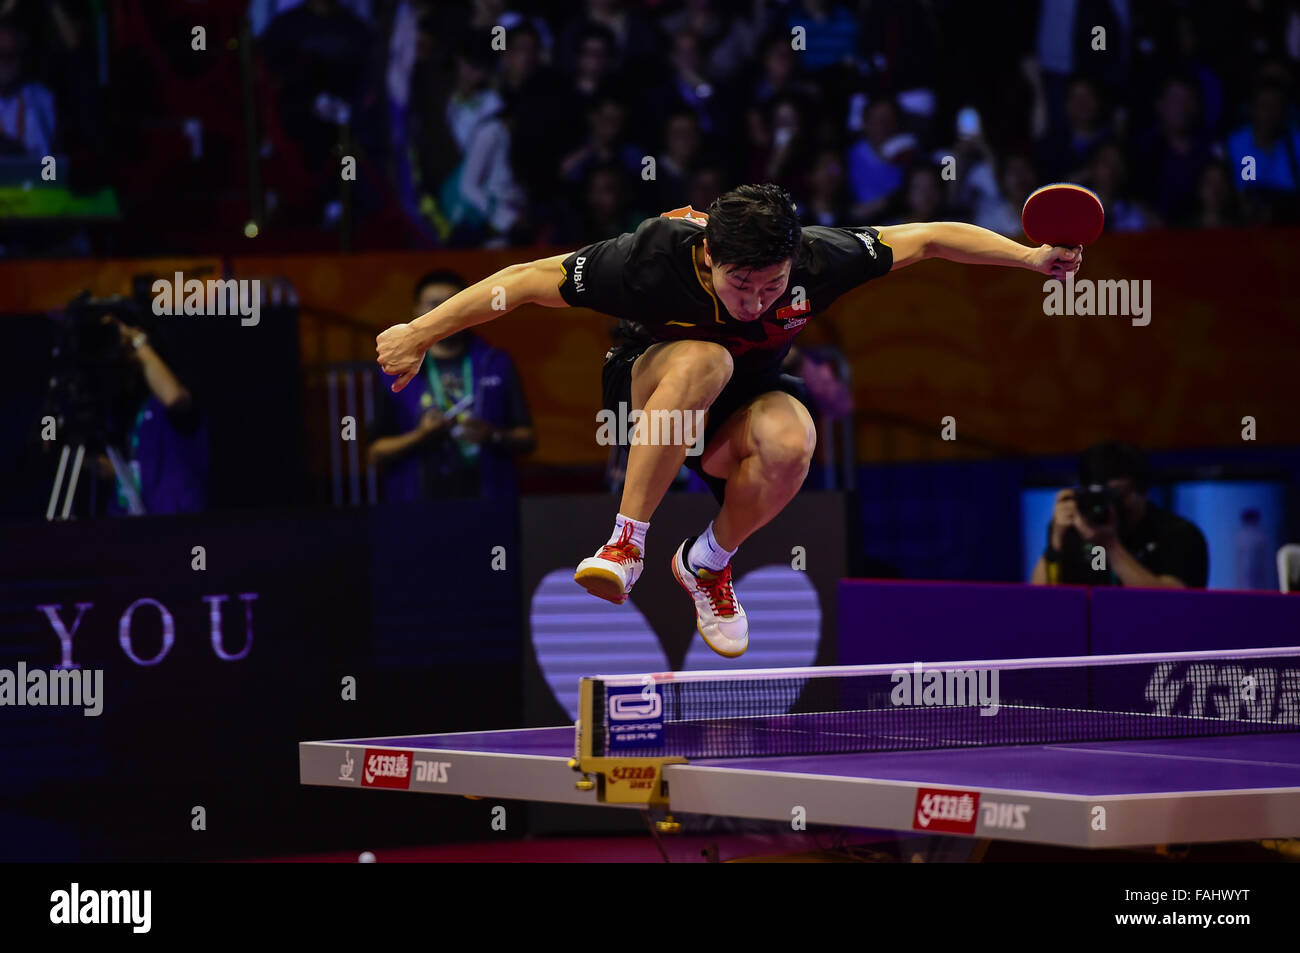 XINHUA SPORTS PHOTOS OF THE YEAR 2015 TRANSMITTED ON Dec. 31, 2015 China's Ma Long jumps onto the table to celebrate after Men's Singles Final against his compatriot Fang Bo at the 53rd Table Tennis World Championships in Suzhou, city of east China's Jiangsu Province, on May 3, 2015. Ma Long claimed the title with 4-2.(Xinhua/Jing Changchun) (wll) Stock Photo